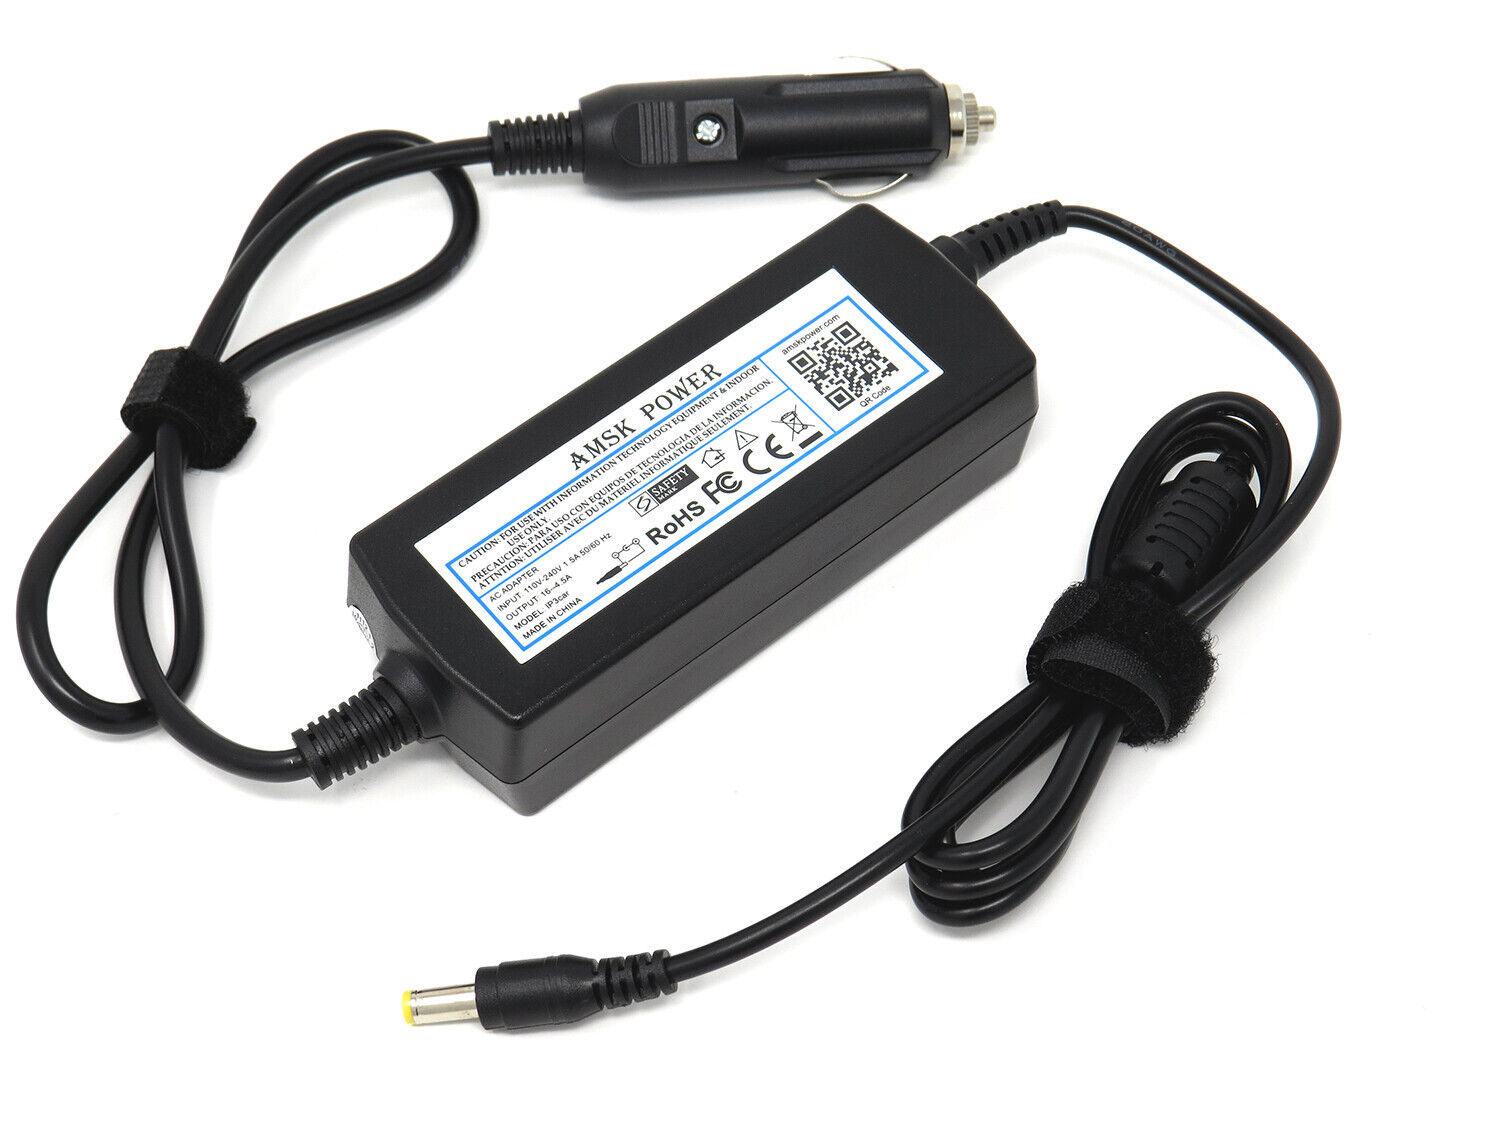 Primary image for Car Charger For Panasonic Toughbook Cf-C2 Cf-20 Cf-31 Cf-52 Laptop Power Supply